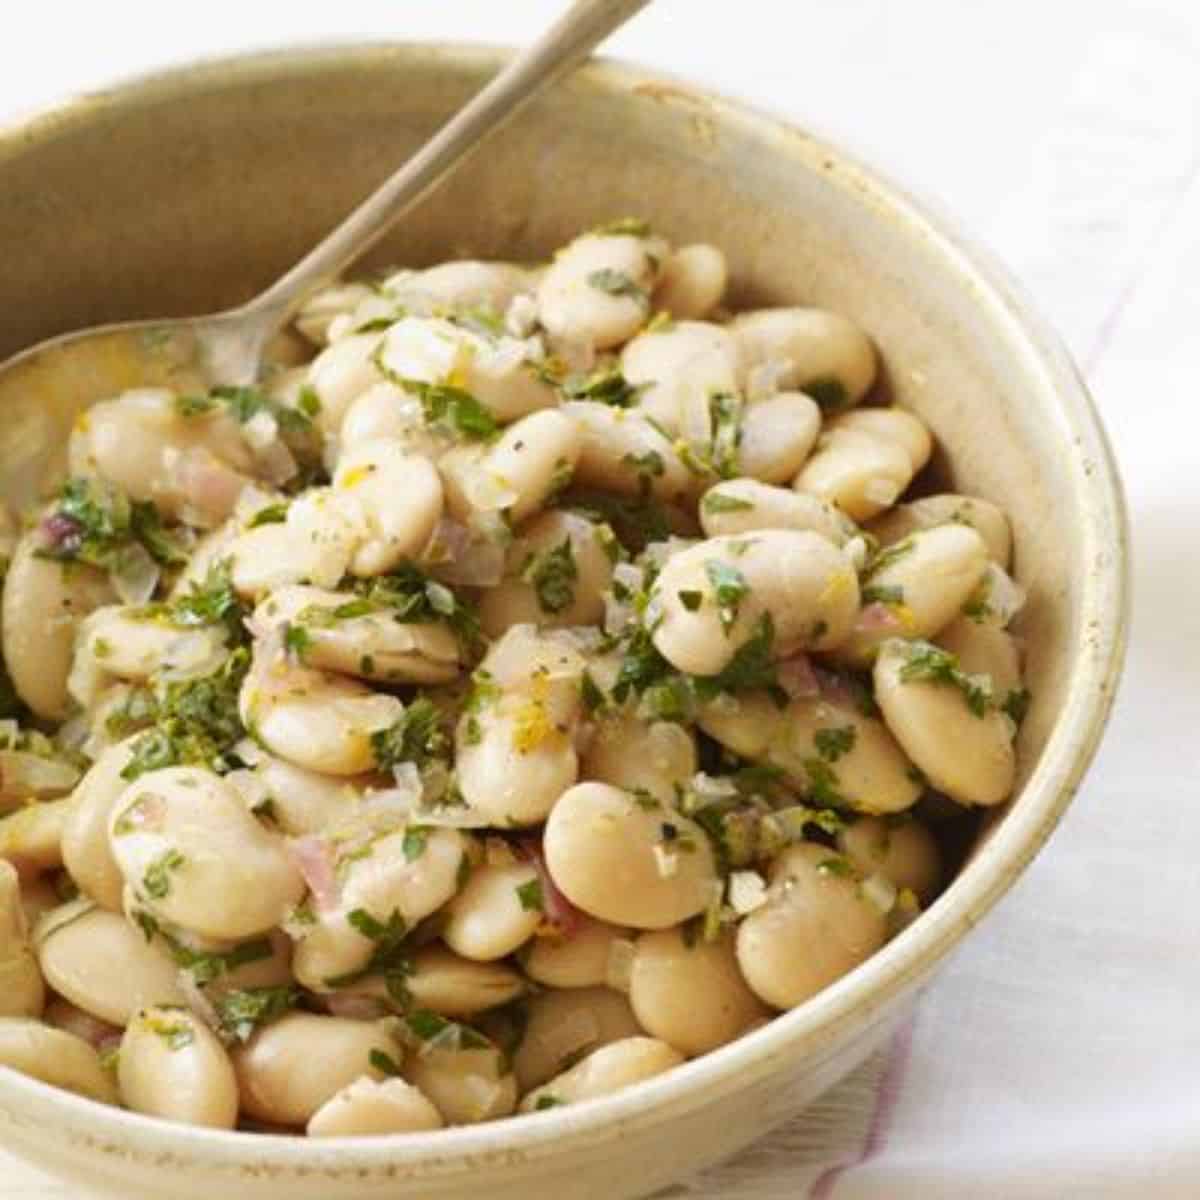 Italian Butter Beans With Meyer Lemon and Tarragon in a gray bowl.